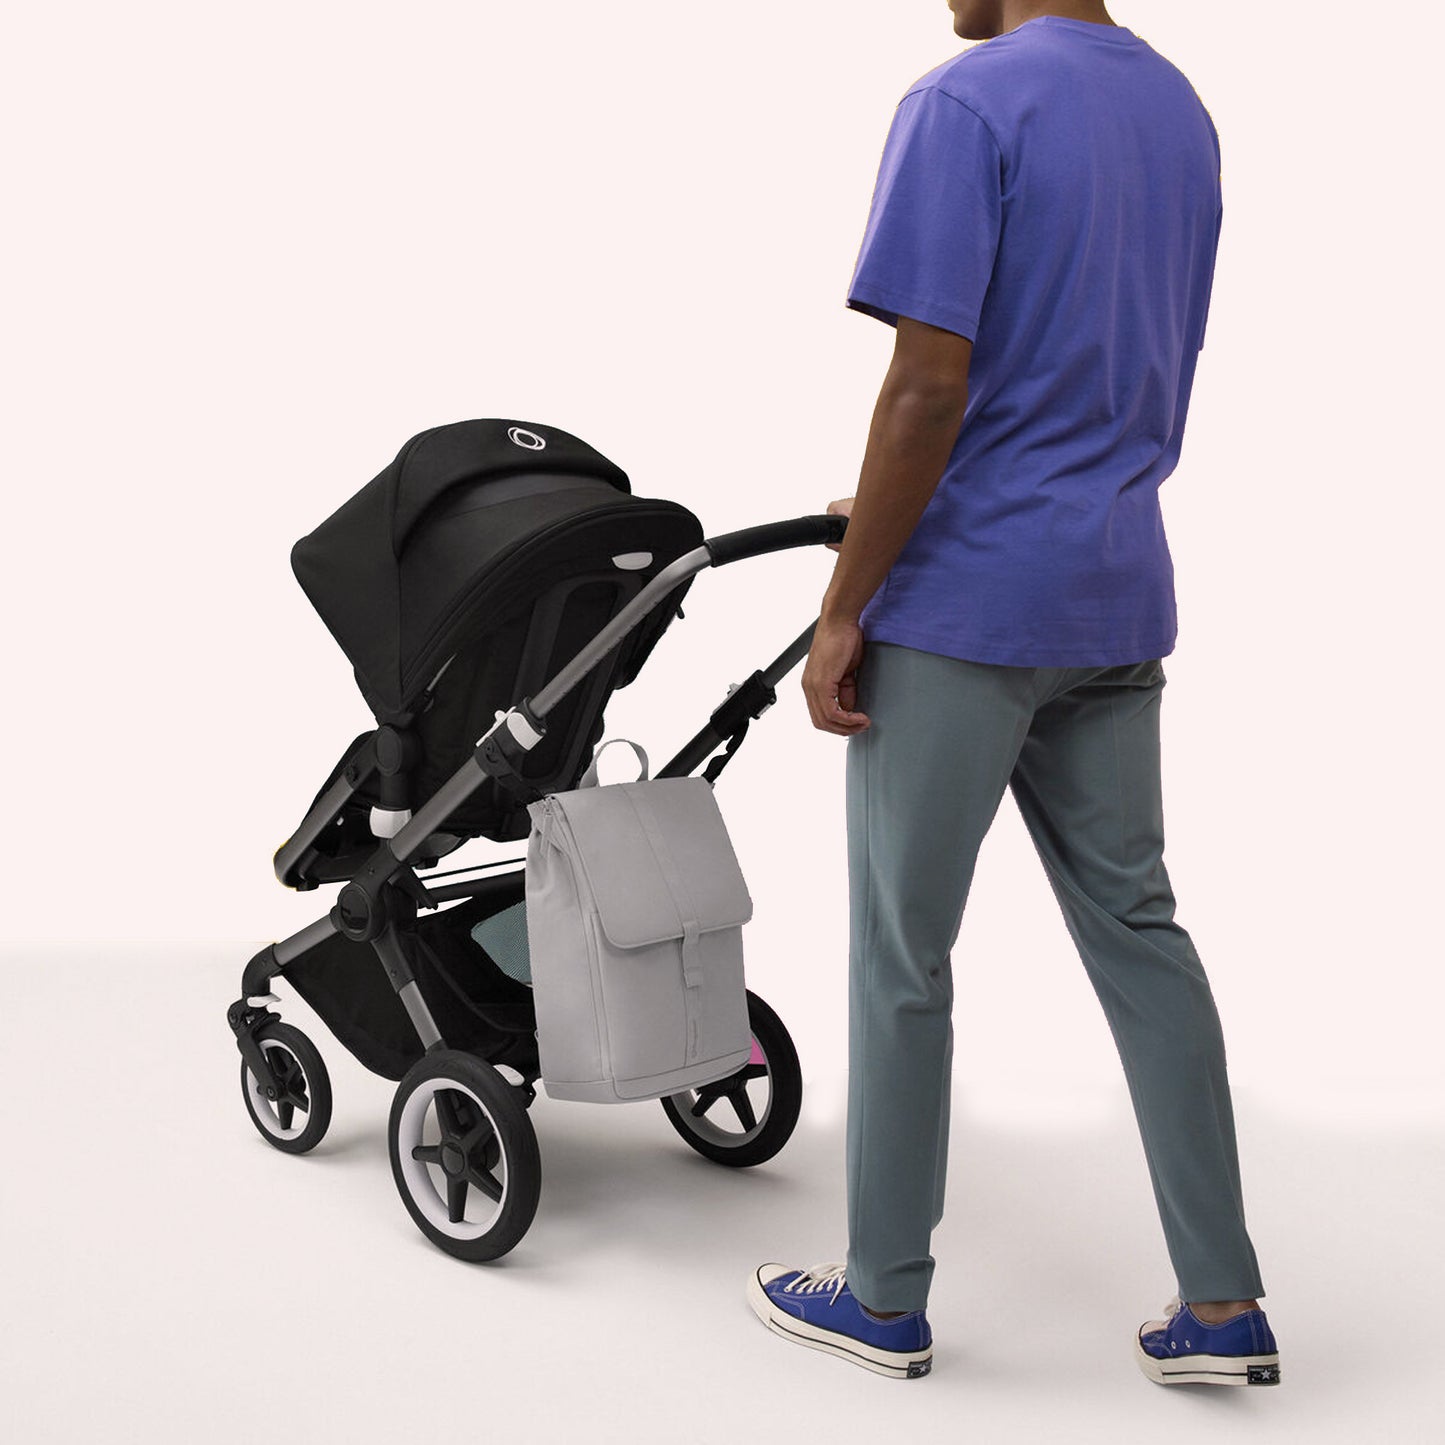 Bugaboo Changing Backpack - Misty Grey